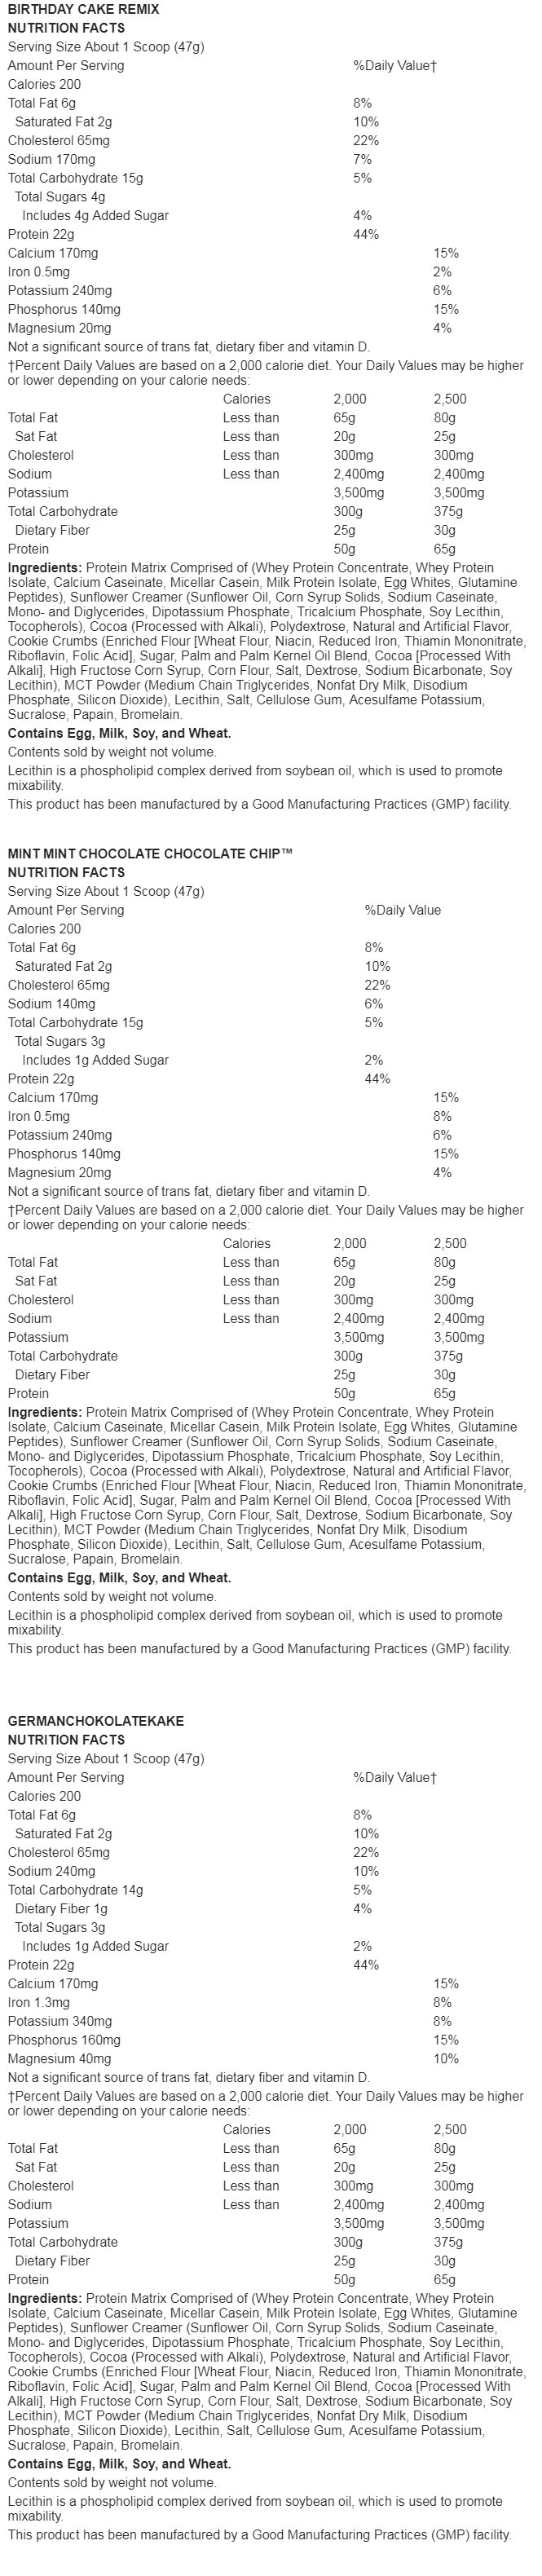 Nutrition facts for Birthday Cake Remix, Mint Chocolate Chip, and German Chocolate Cake with a 200-calorie serving containing 22g protein, 6g fat, and 15g carbs.